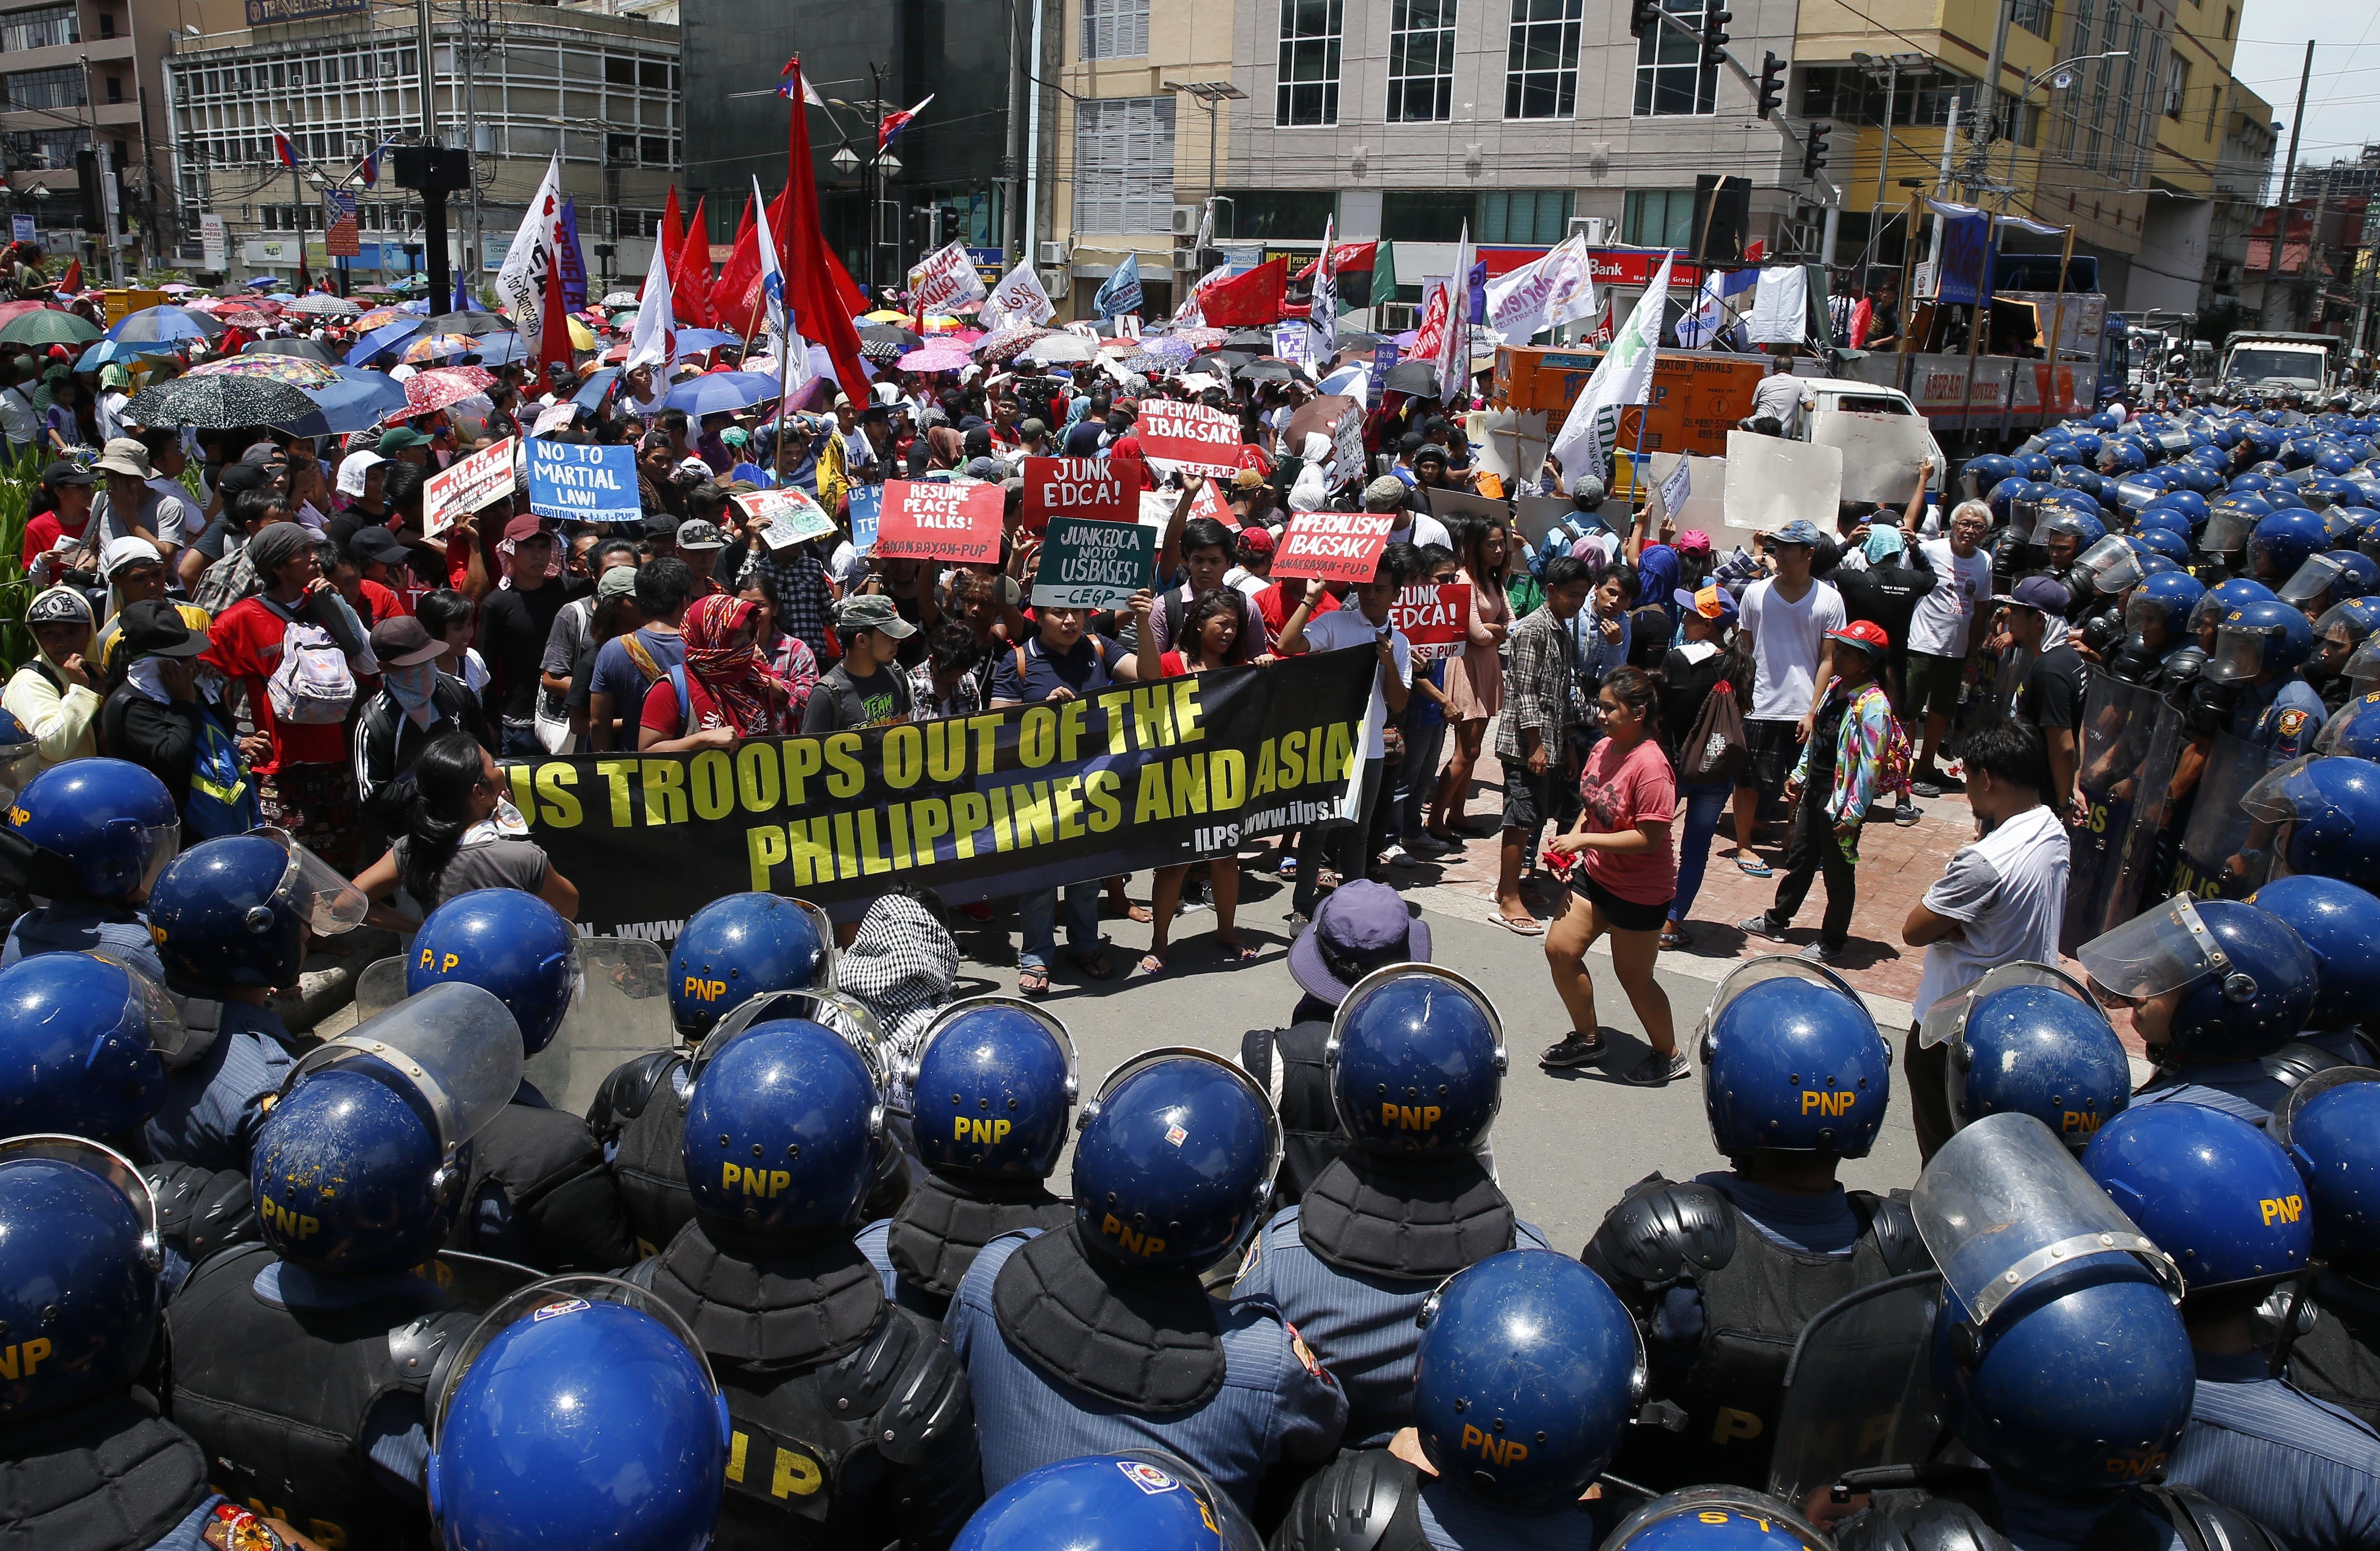 Protesters are blocked by police as they attempt to march closer to the U.S. Embassy to denounce the U.S. military's role in the ongoing battle between Government forces and Muslim militants who laid siege to Marawi city in southern Philippines for three weeks now Monday, June 12, 2017 in Manila, Philippines. The protesters also denounced President Rodrigo Duterte's declaration of Martial Law in the whole region of Mindanao in southern Philippines.(AP Photo/Bullit Marquez)